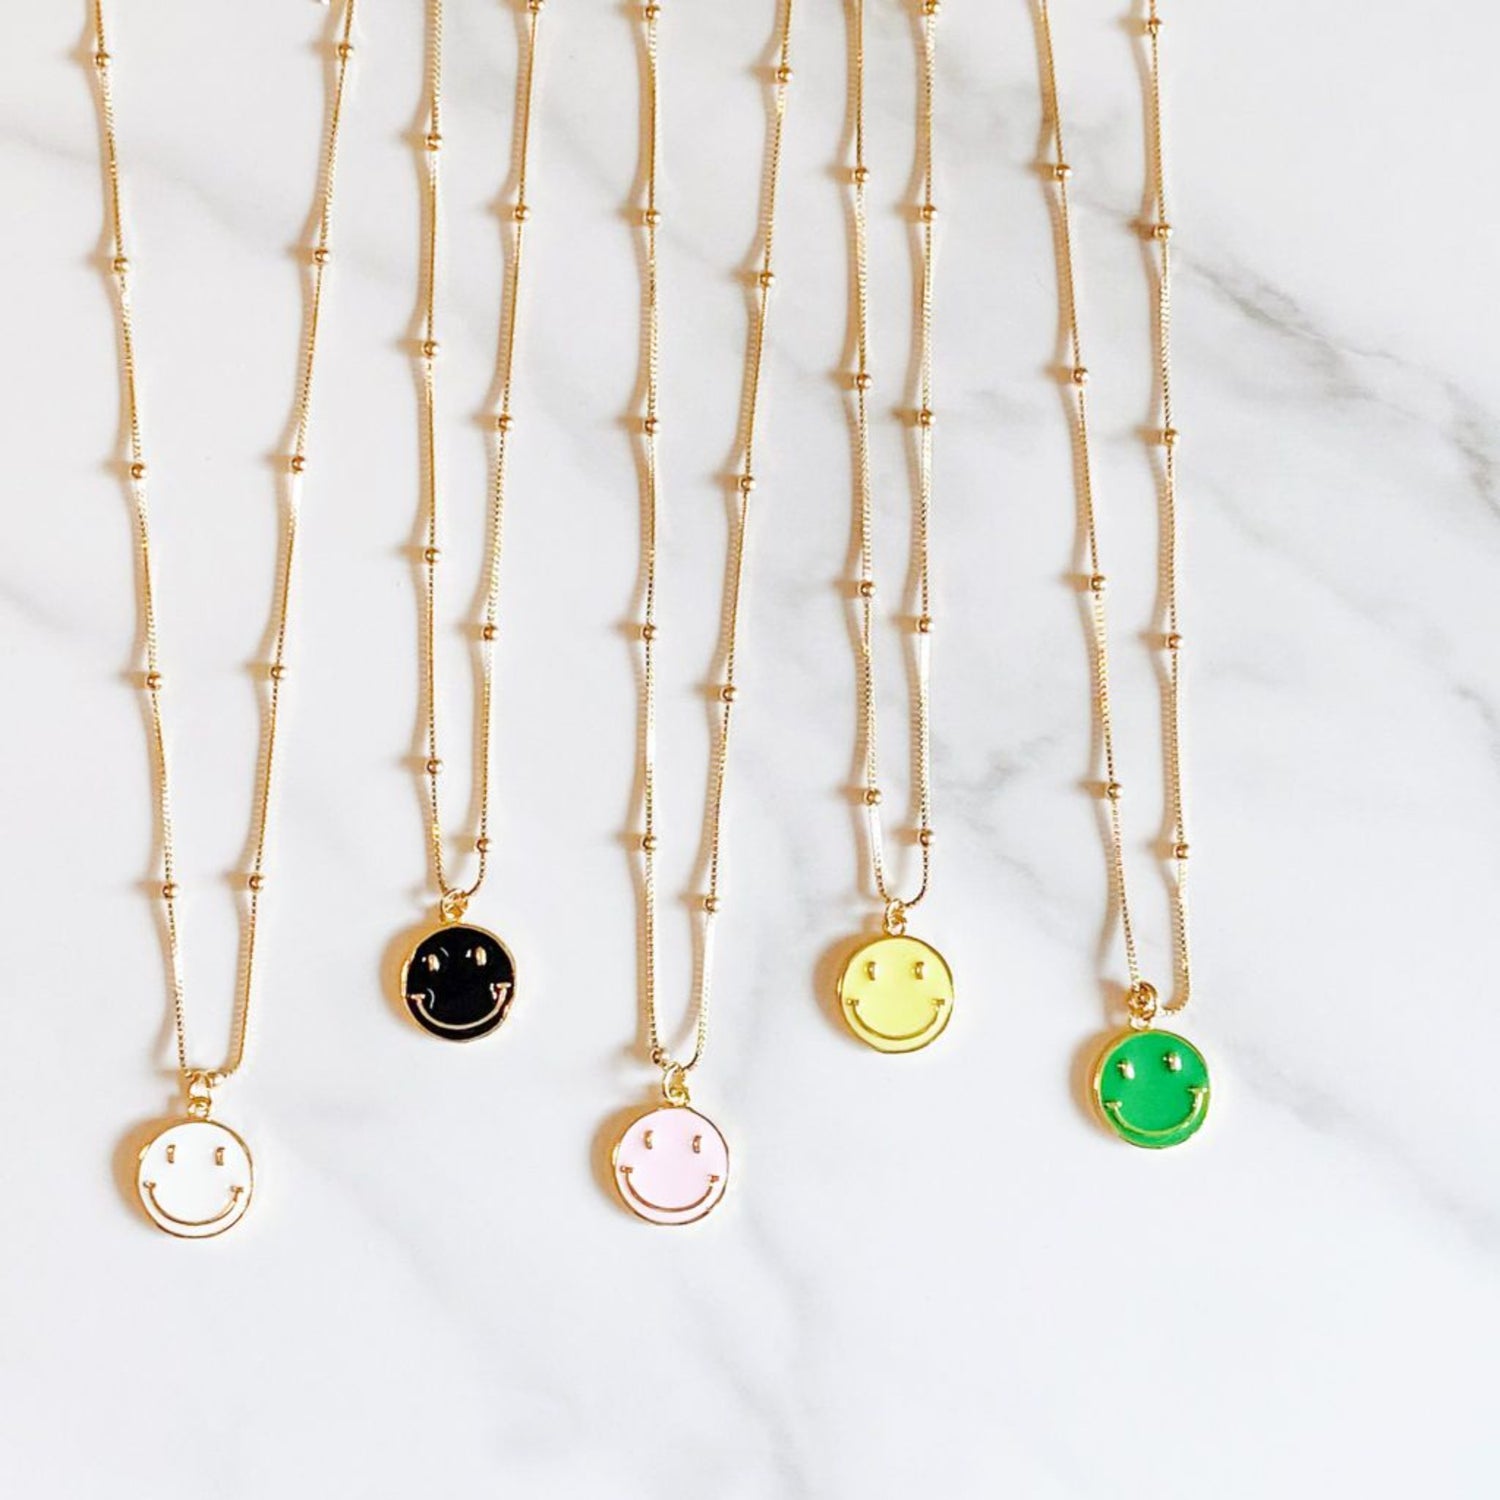 Happy necklace, gold-filled chain and an enamel pendant, available in white, black, pink, yellow, and green. Selected by ISVI Boutique, Miami